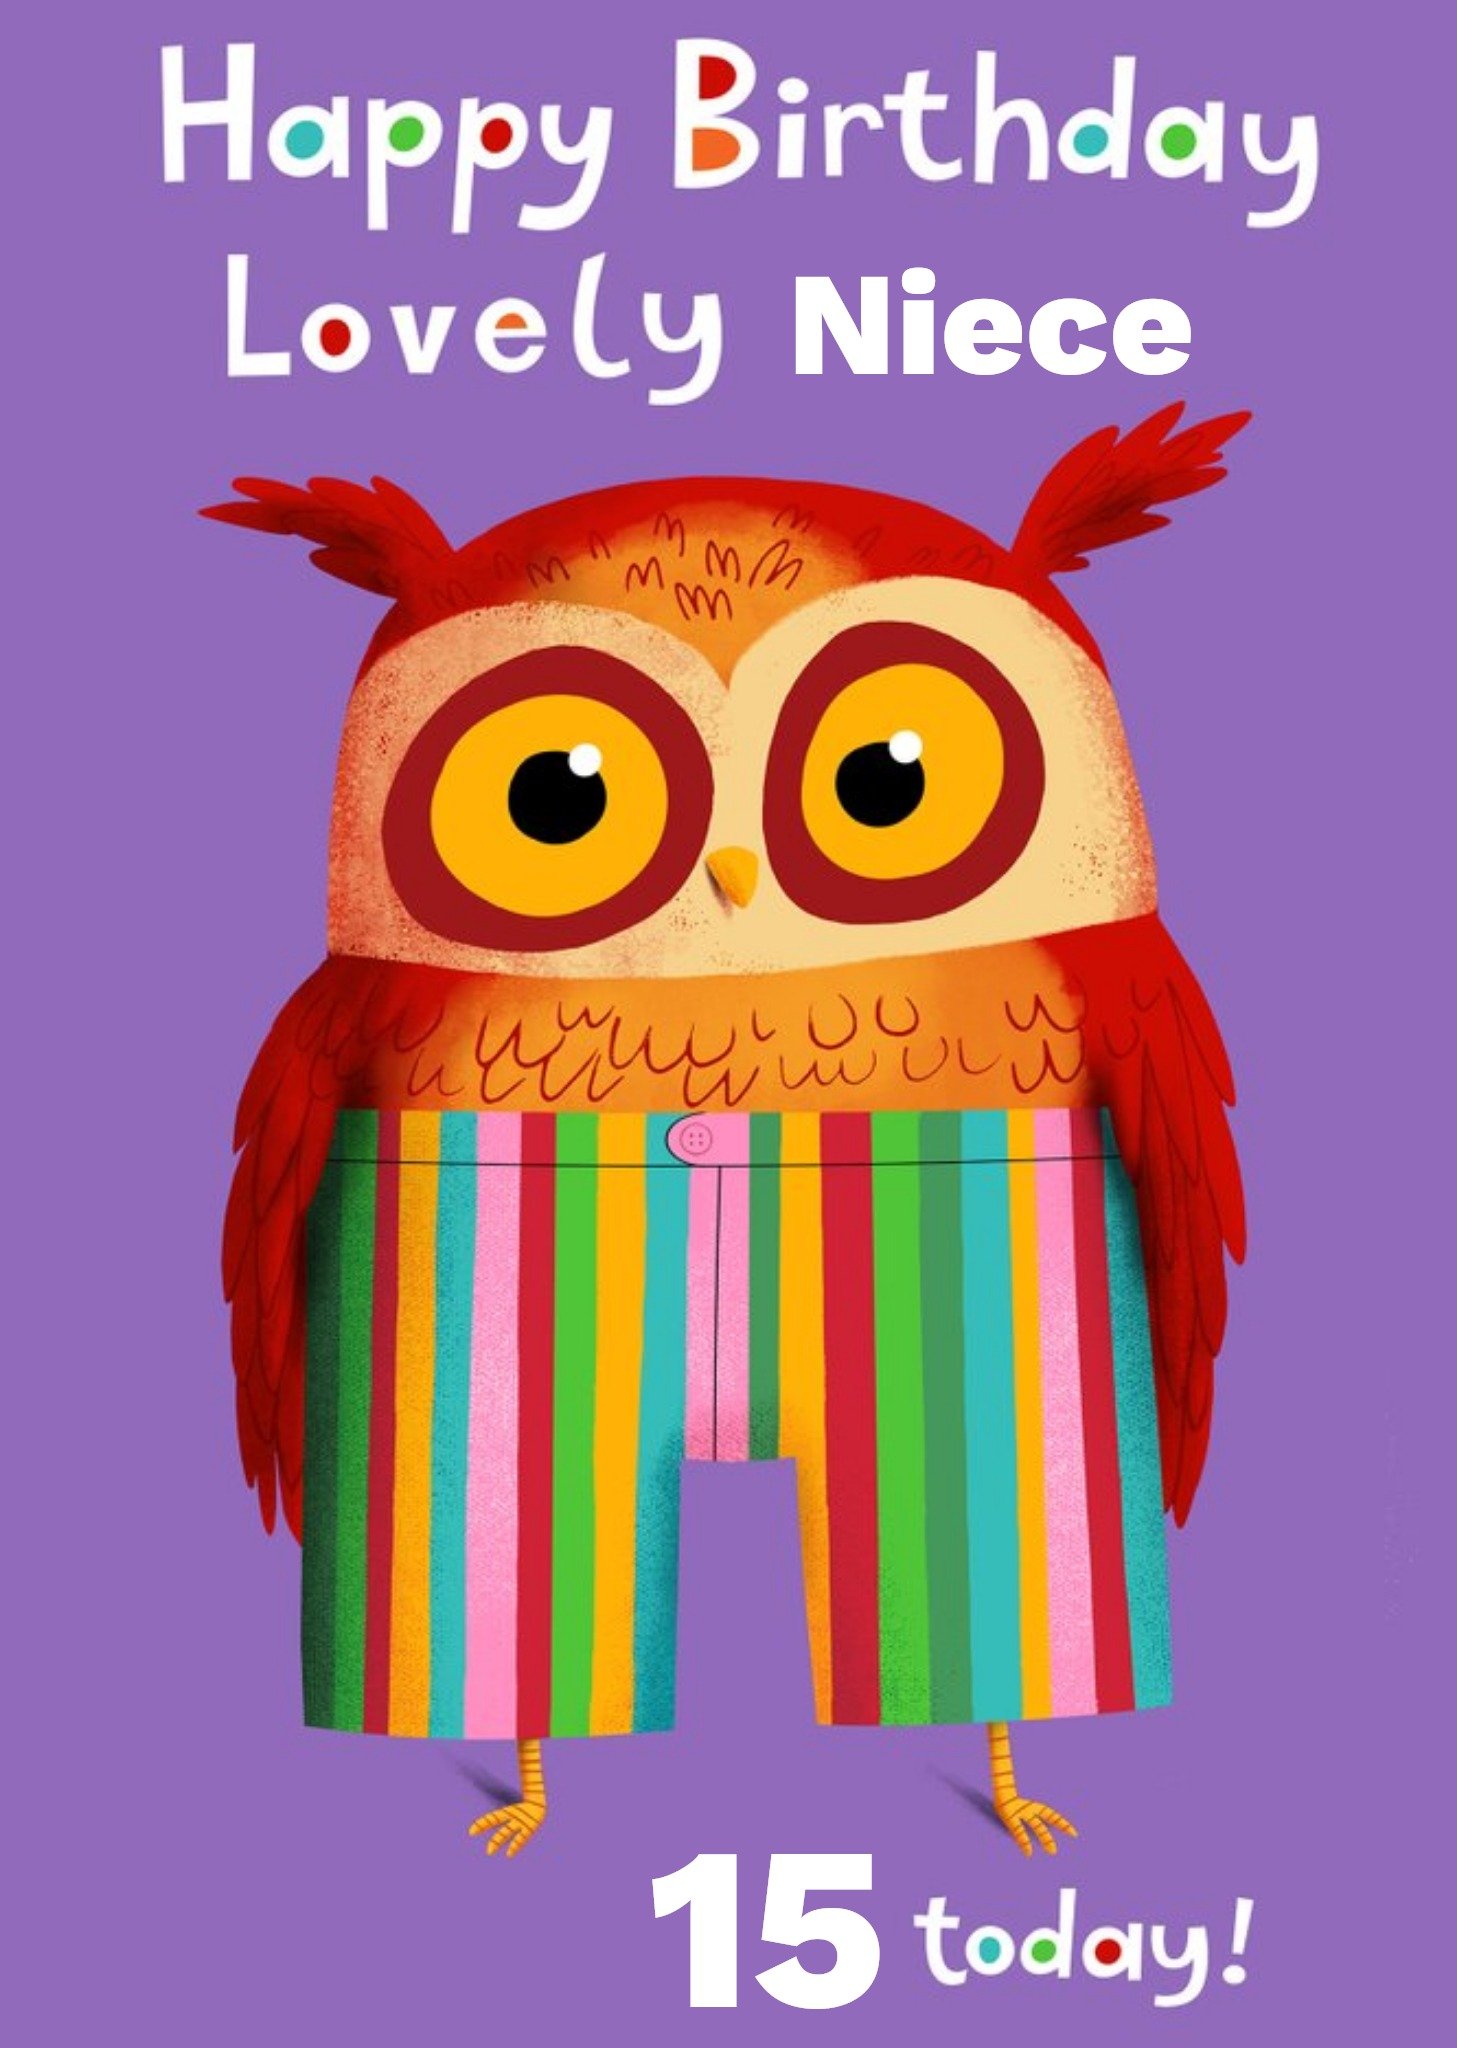 Moonpig Funky Owl Wearing Stripy Colourful Shorts Personalise Age Niece Birthday Card, Large